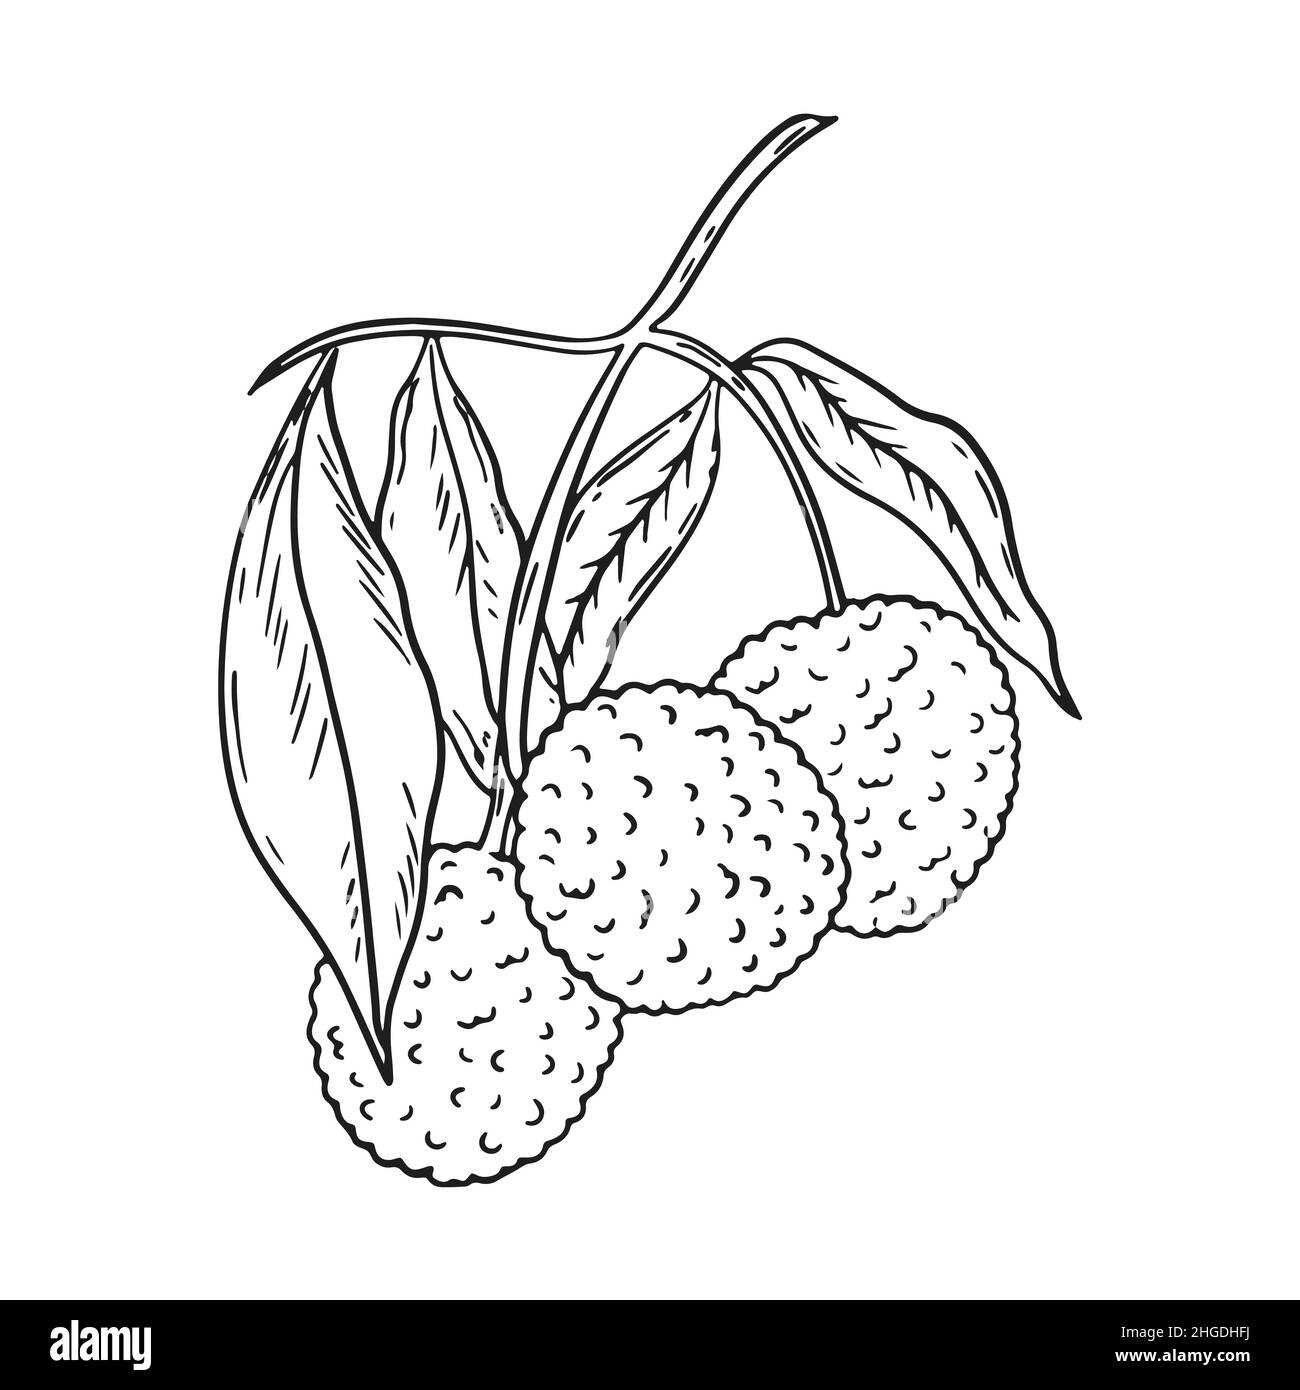 Lychee hand drawn sketch isolated vector illustration Stock Vector